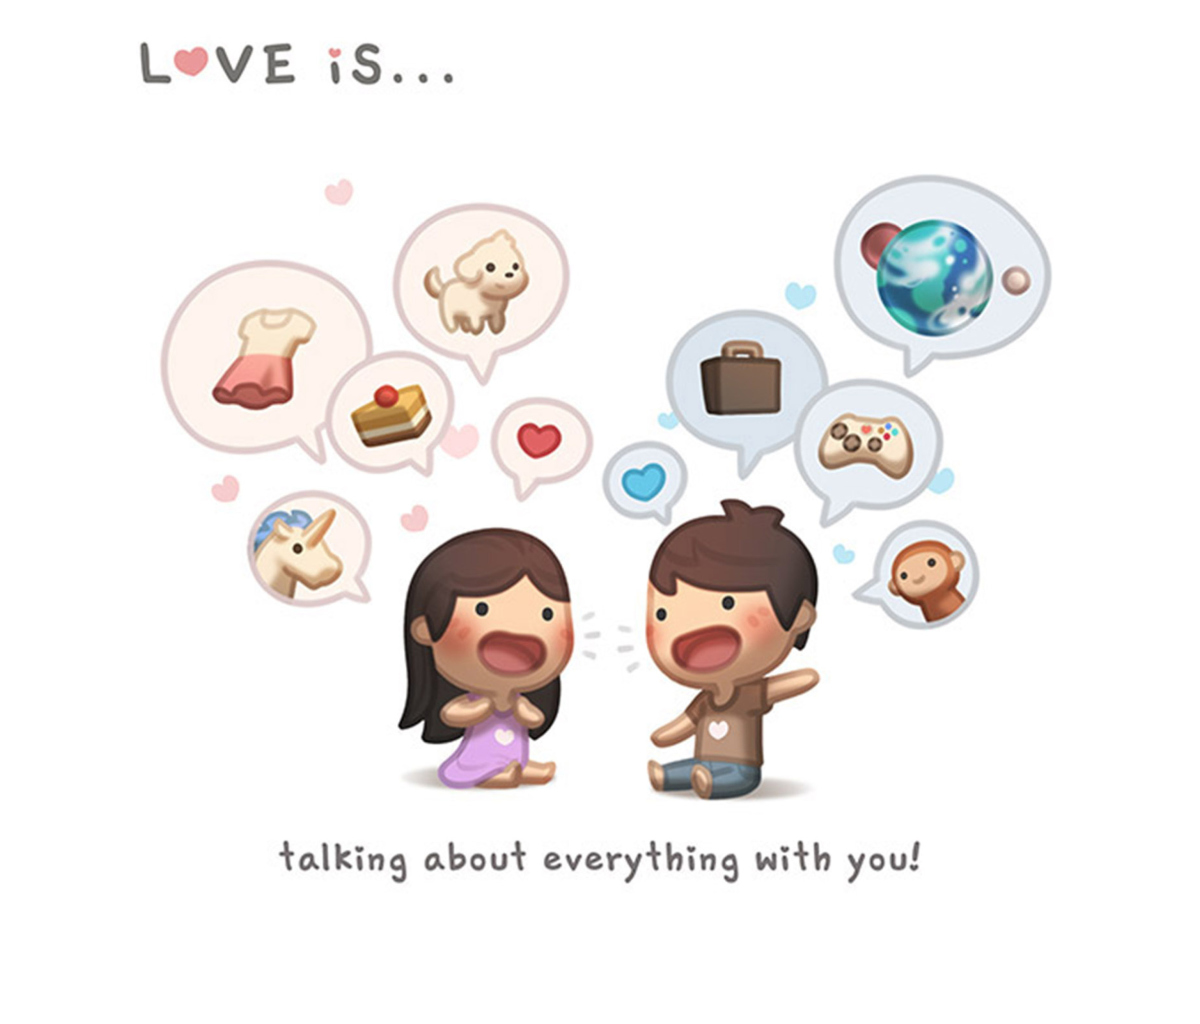 Das Love Is - Talking About Everything With You Wallpaper 1200x1024